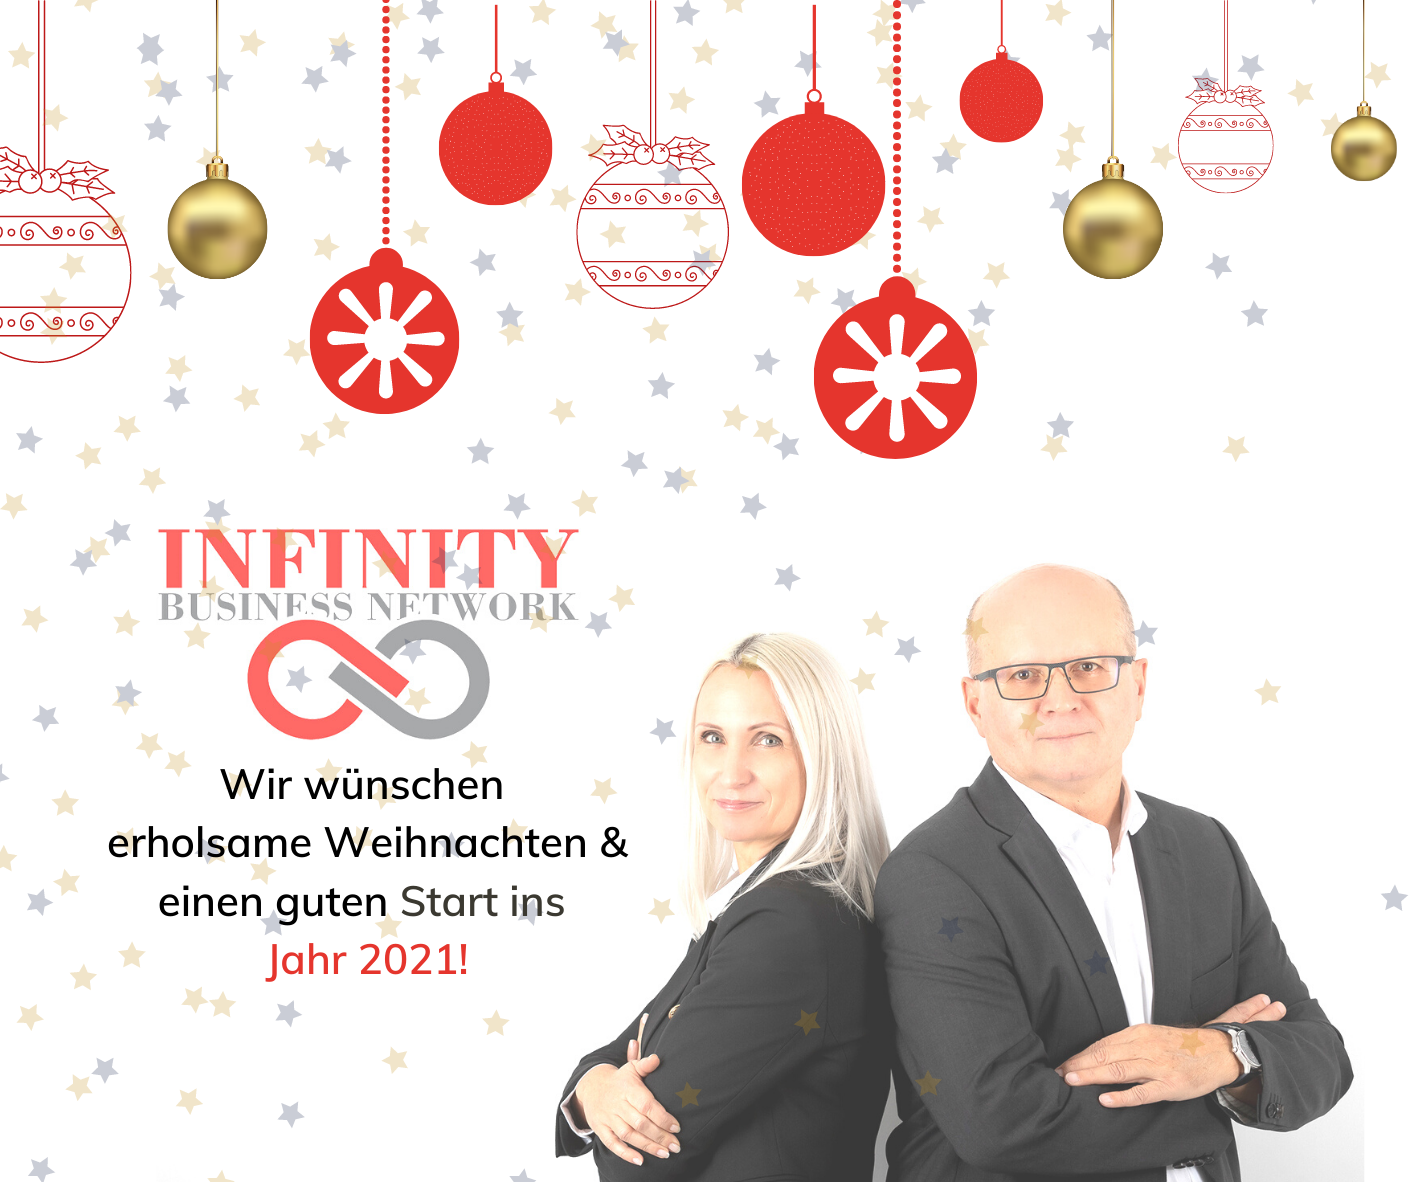 Infinity Business Network